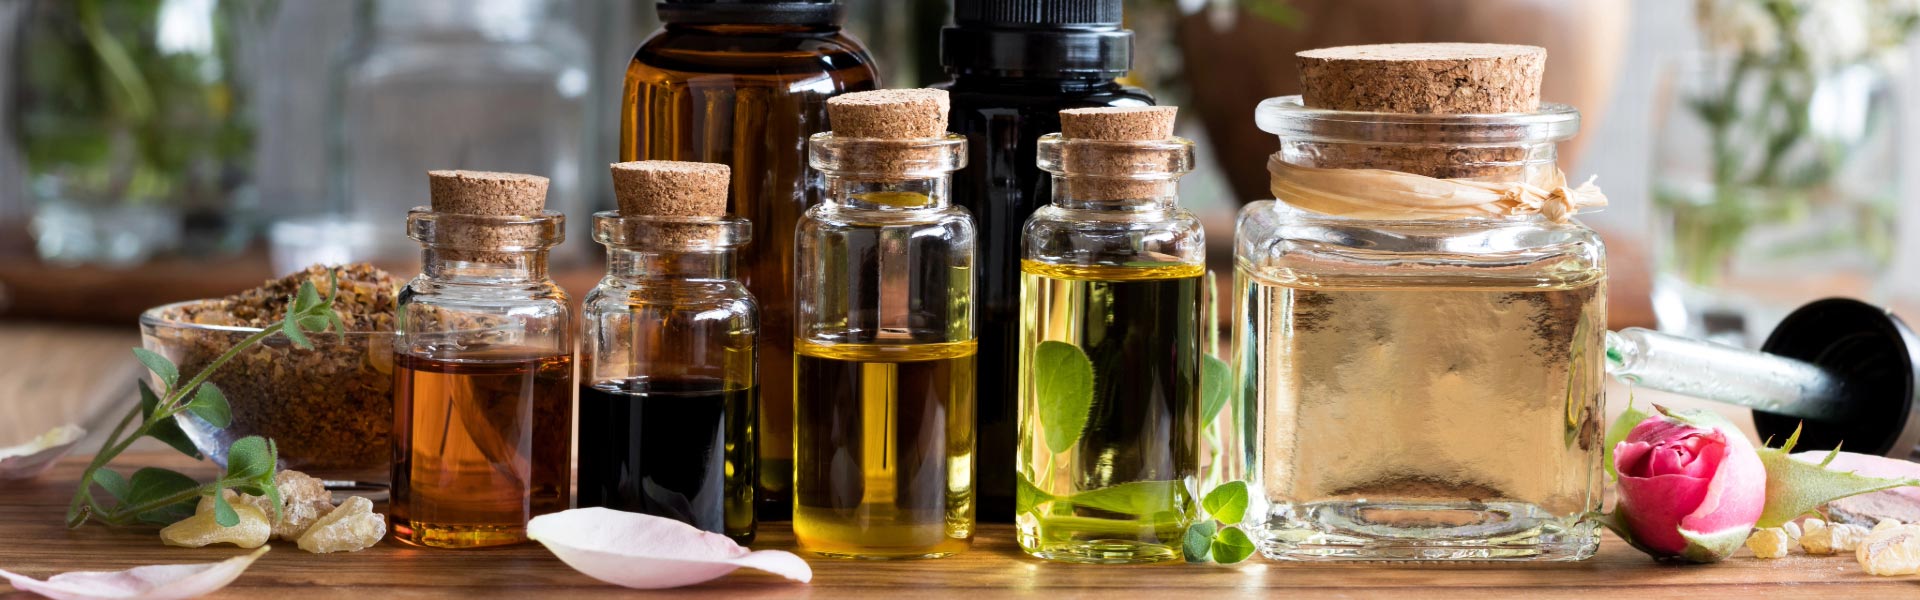 Essential oils in different glass bottles with herbs and rose petals